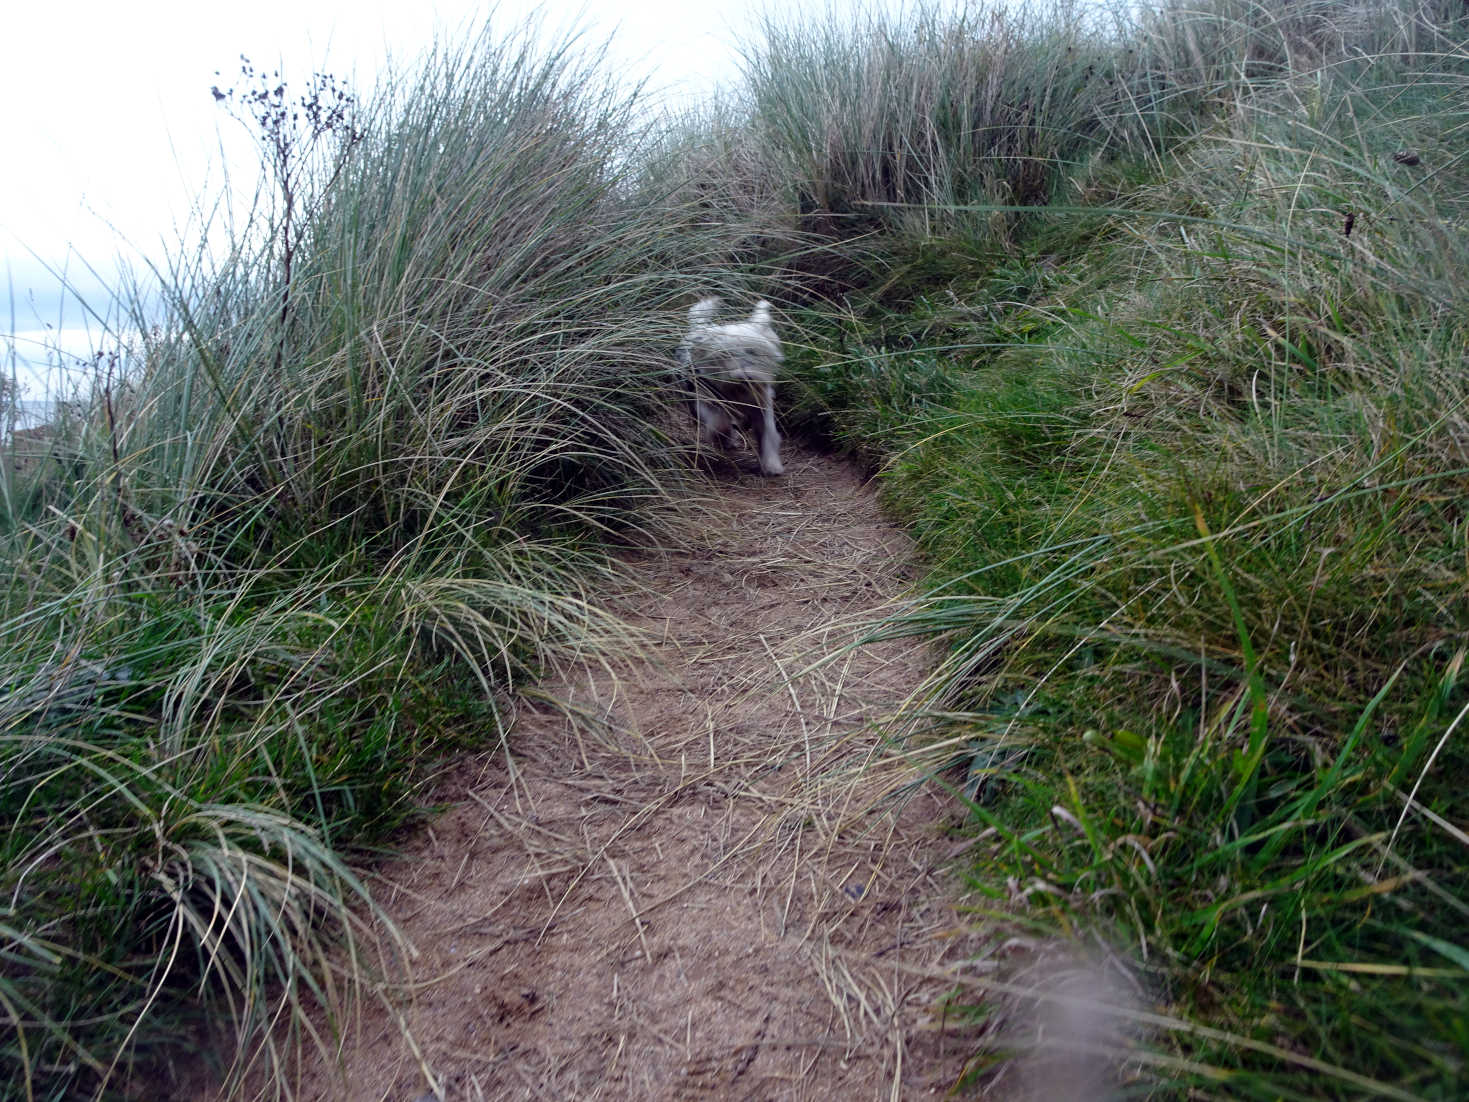 poppy the westie bashes through the dunes